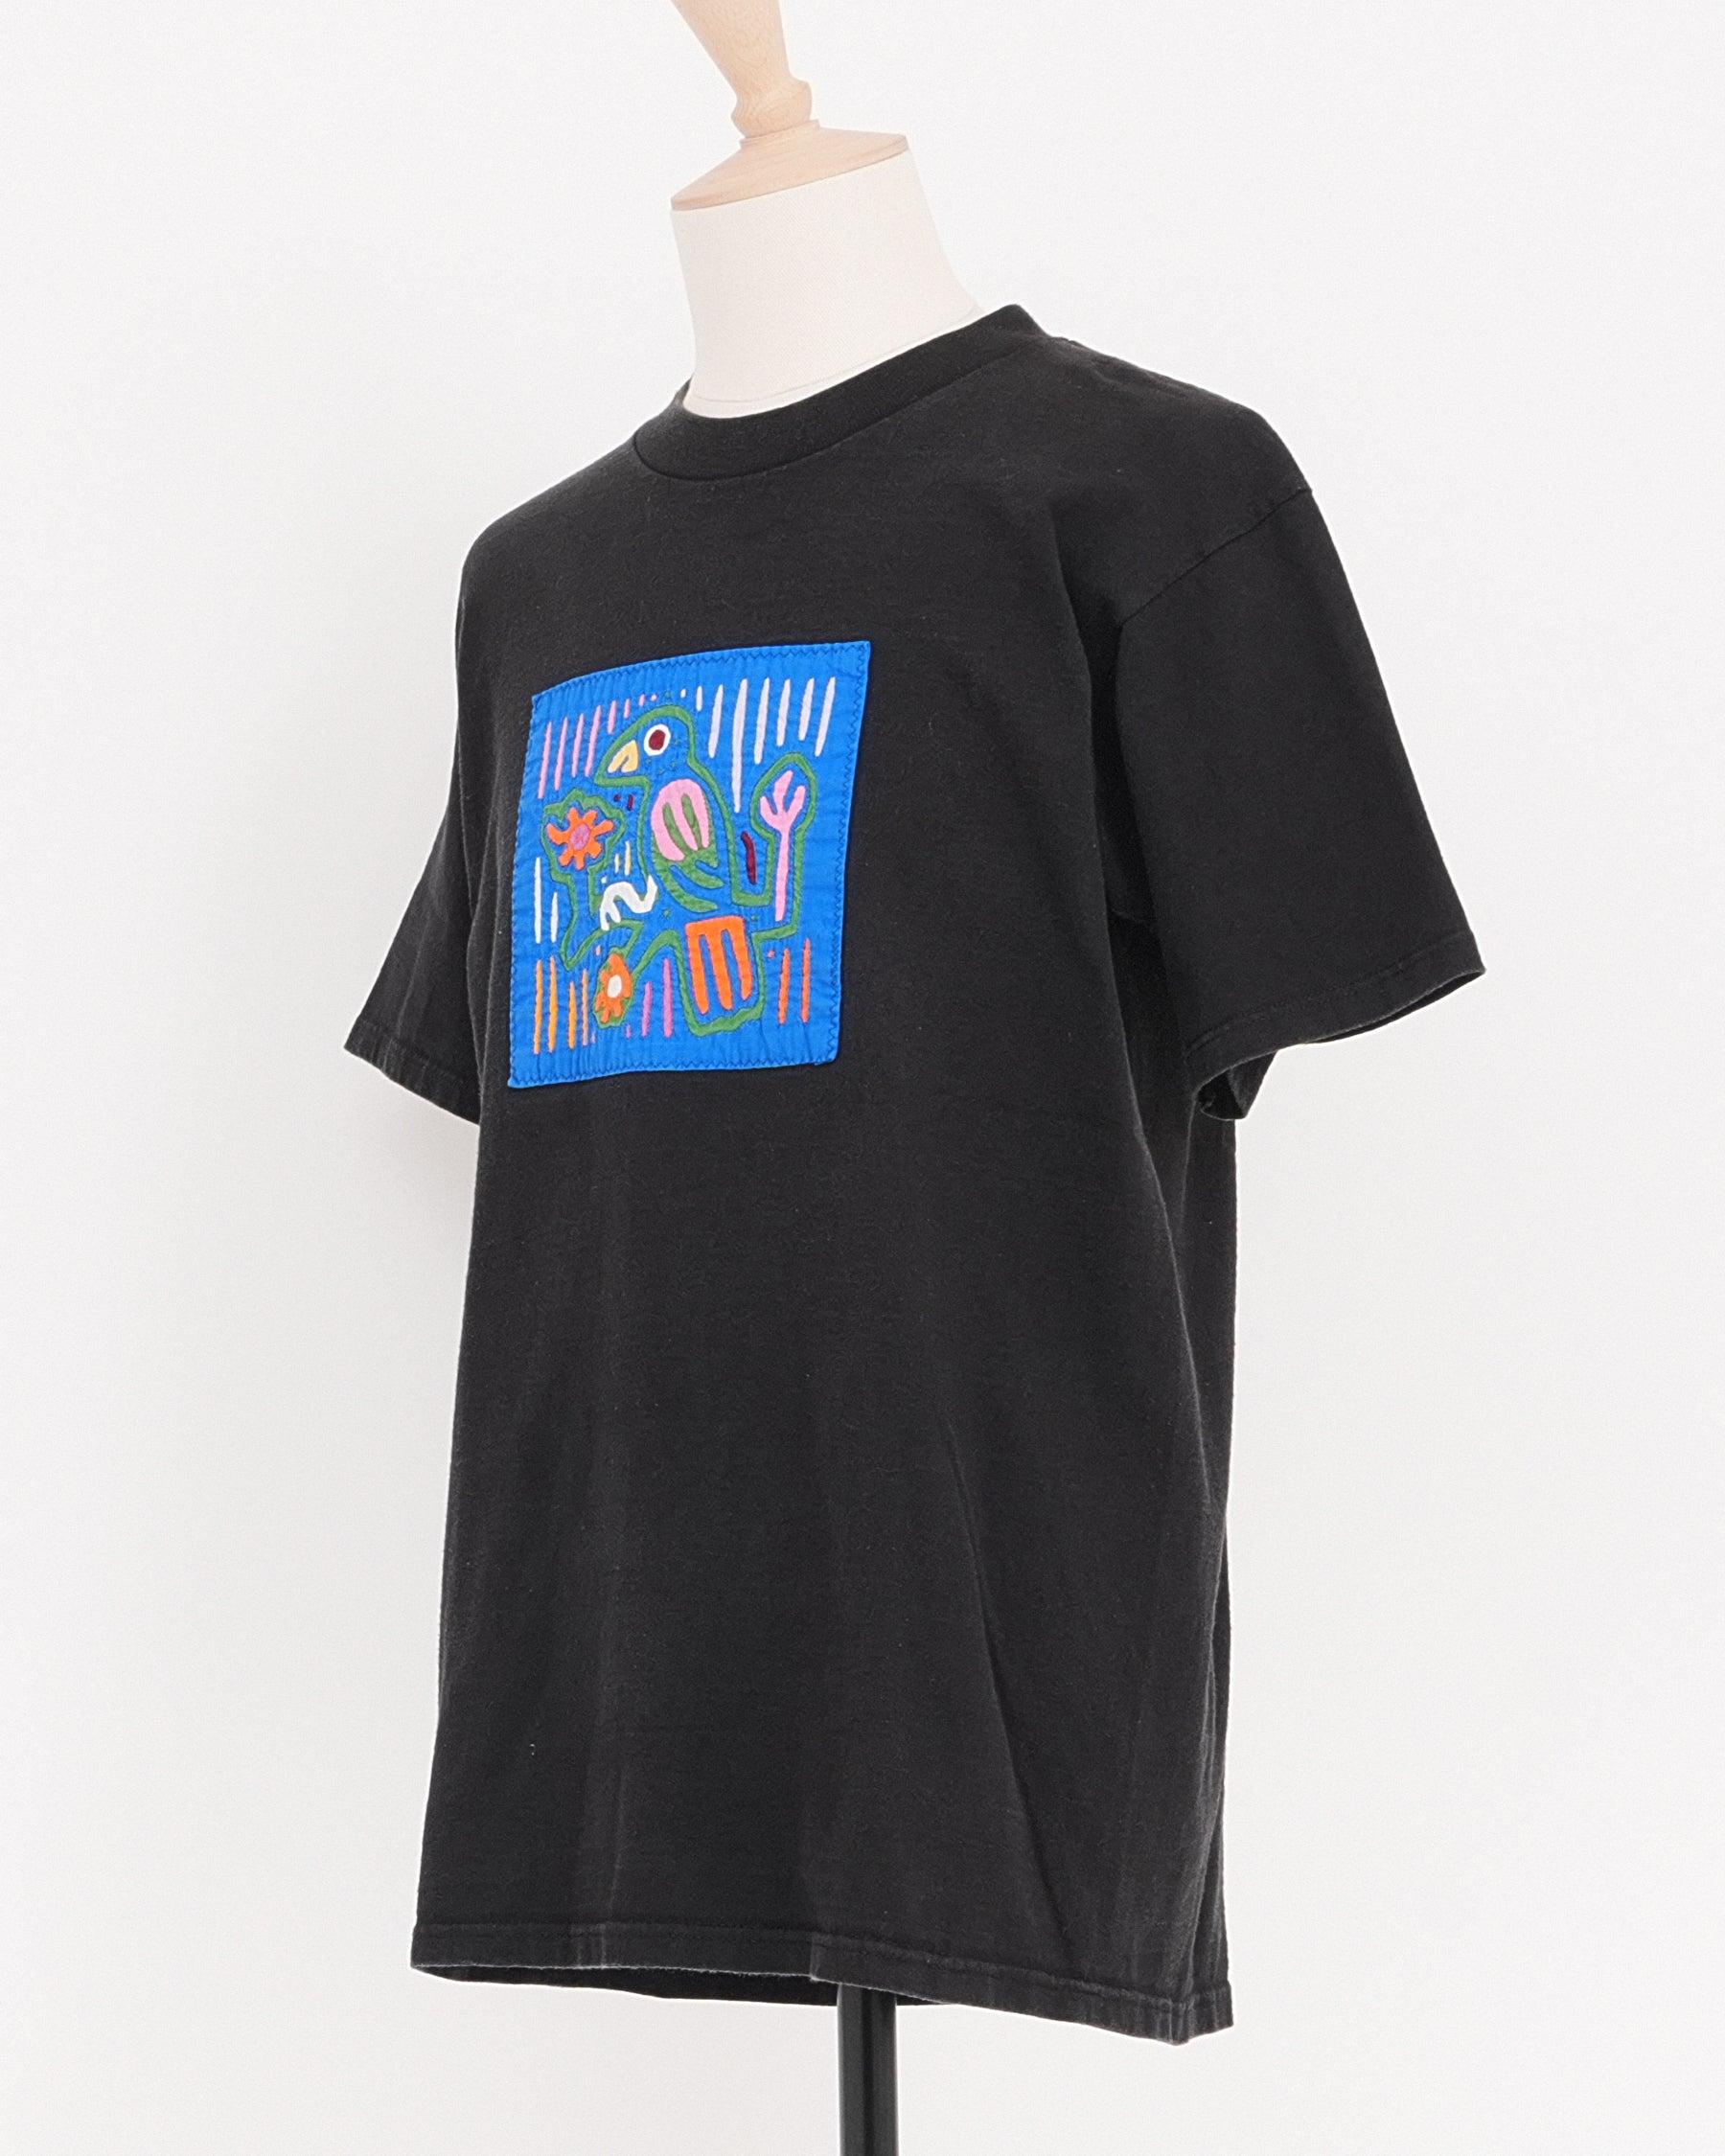 Mola Fabric Embroidery T-shirt